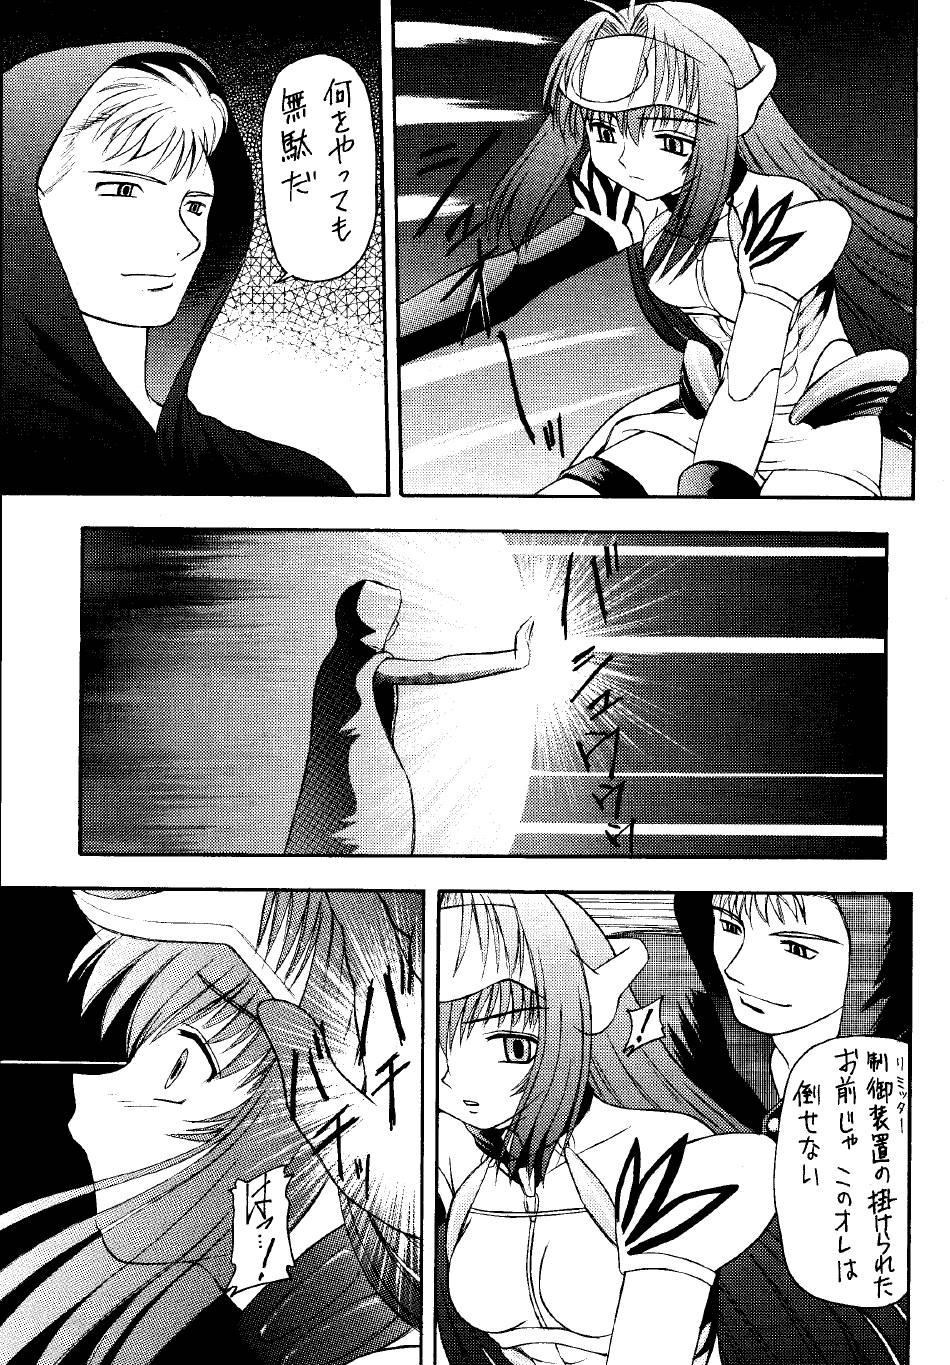 Reverse Cowgirl Angel Hearts - Xenosaga Strap On - Page 2